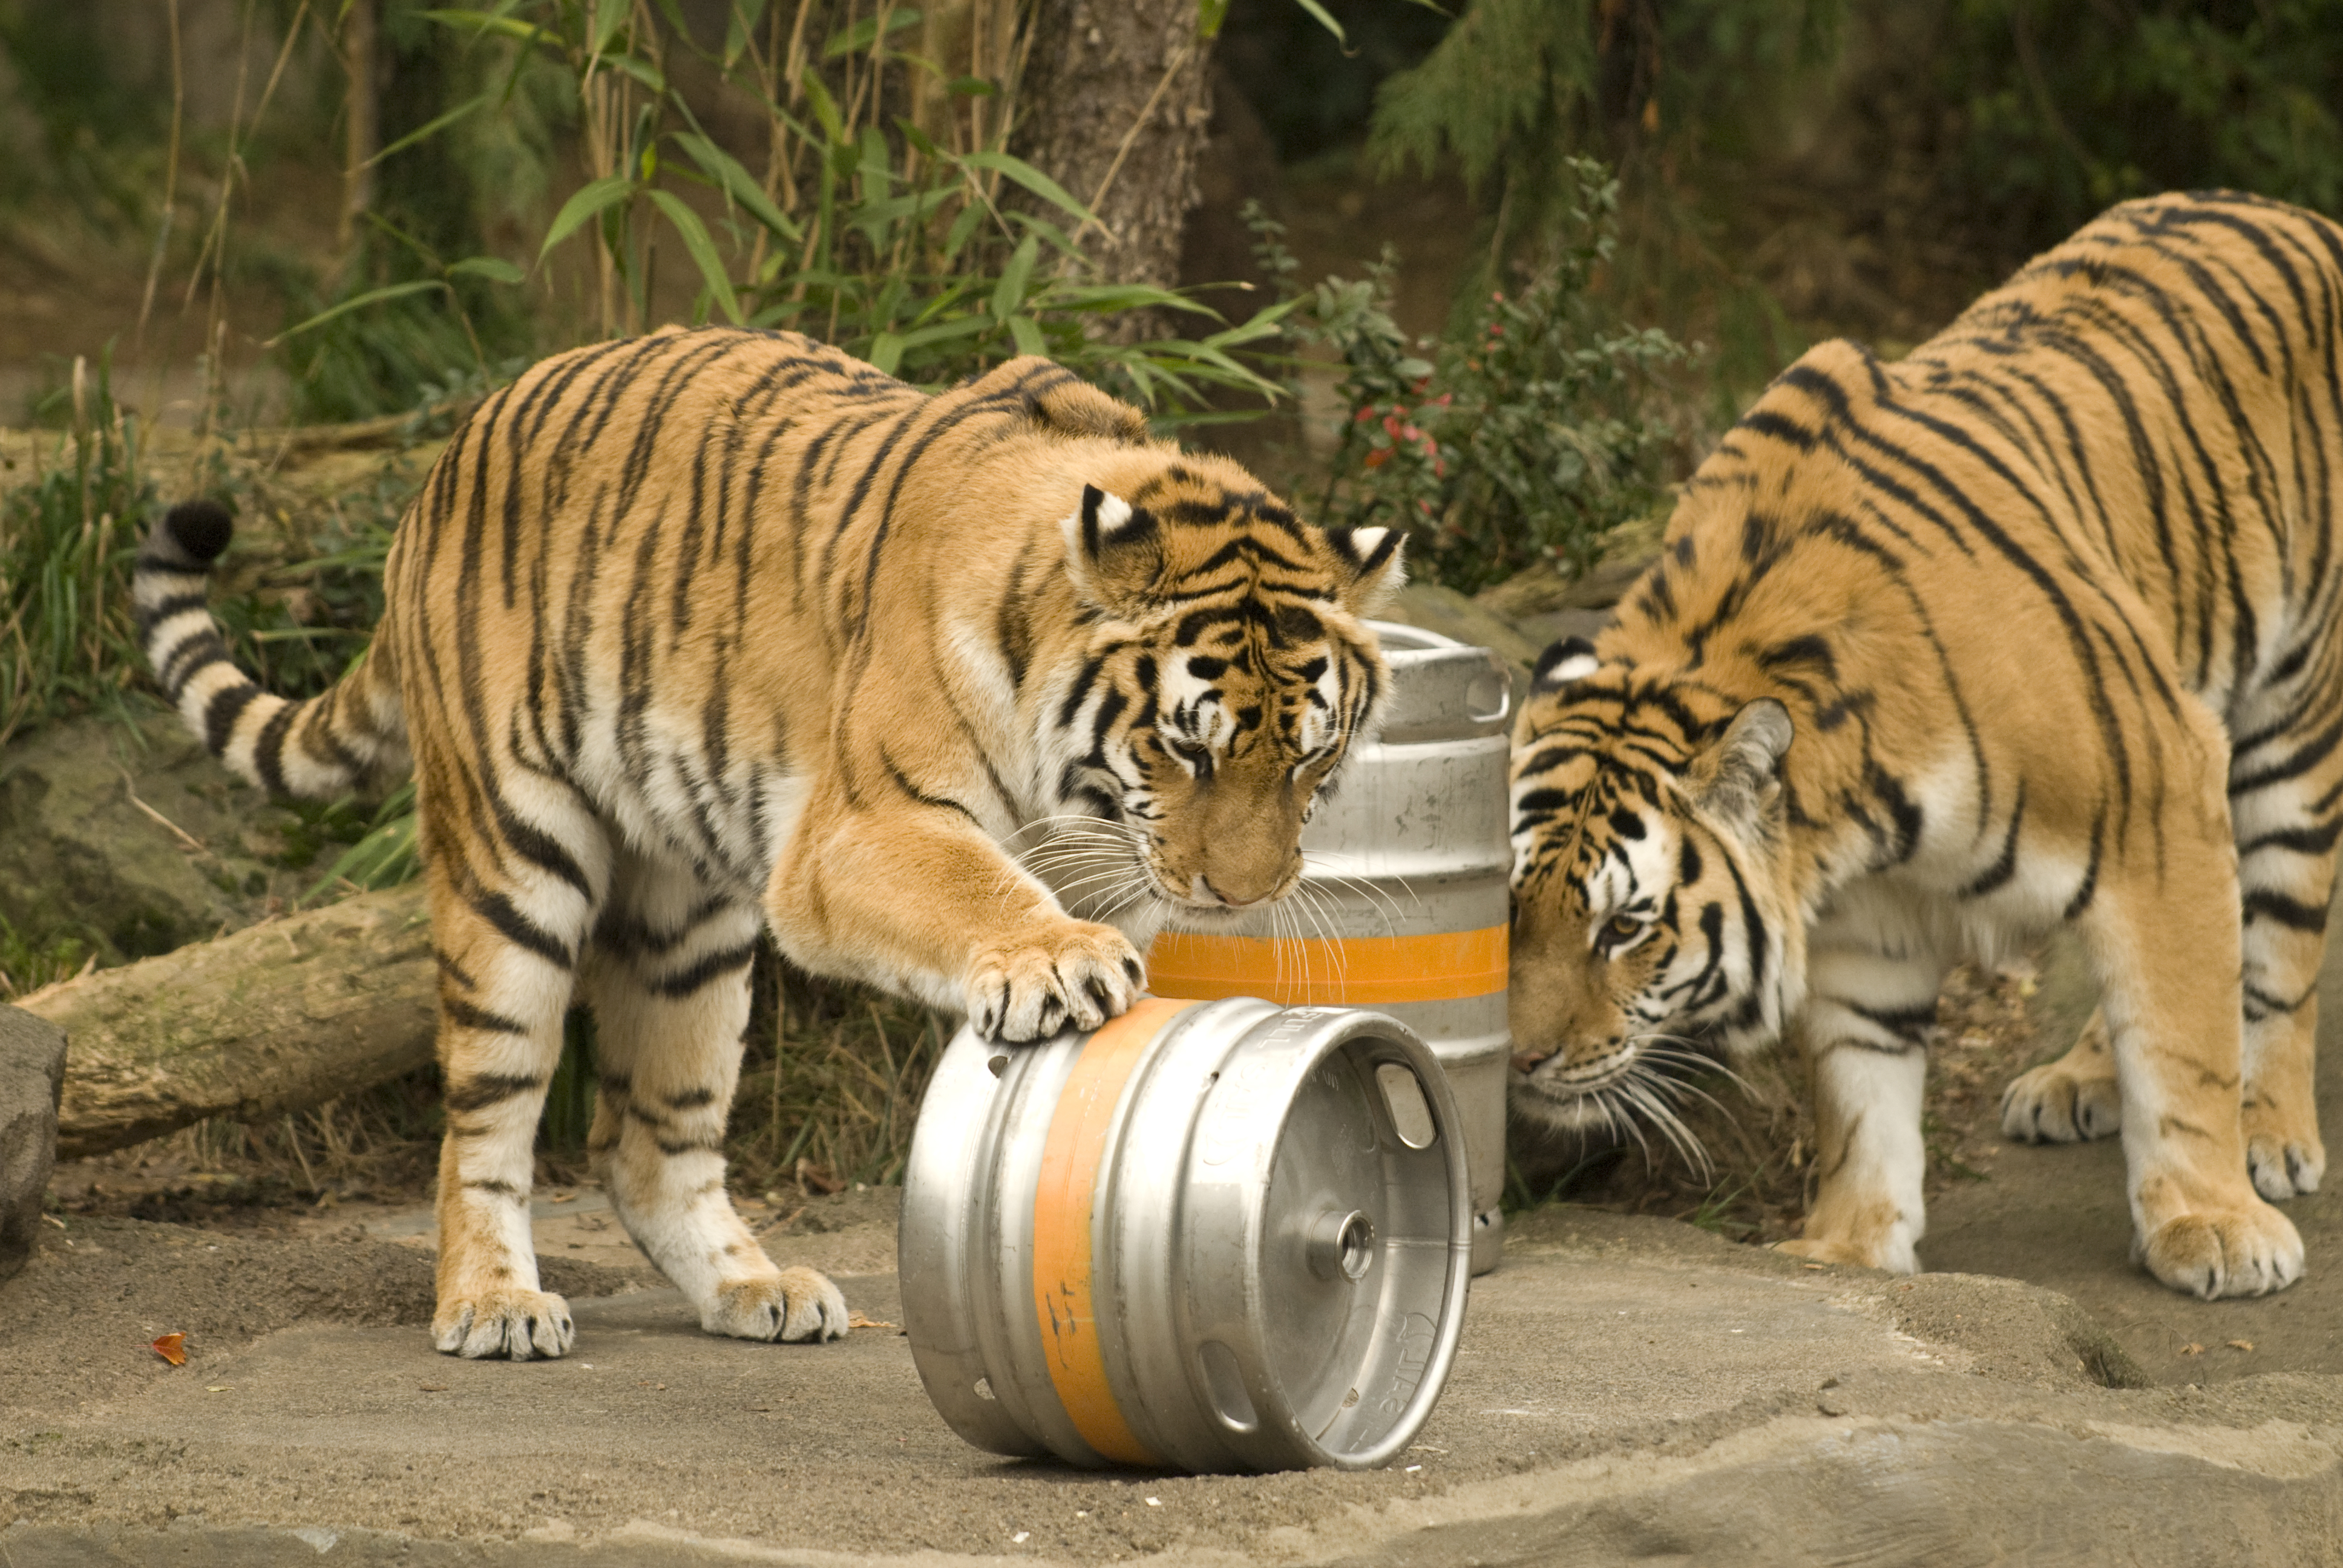 The Siberian tiger siblings, Mick and Nic, bat around a beer keg compliments of Full Sail Brewery at the Oregon Zoo.